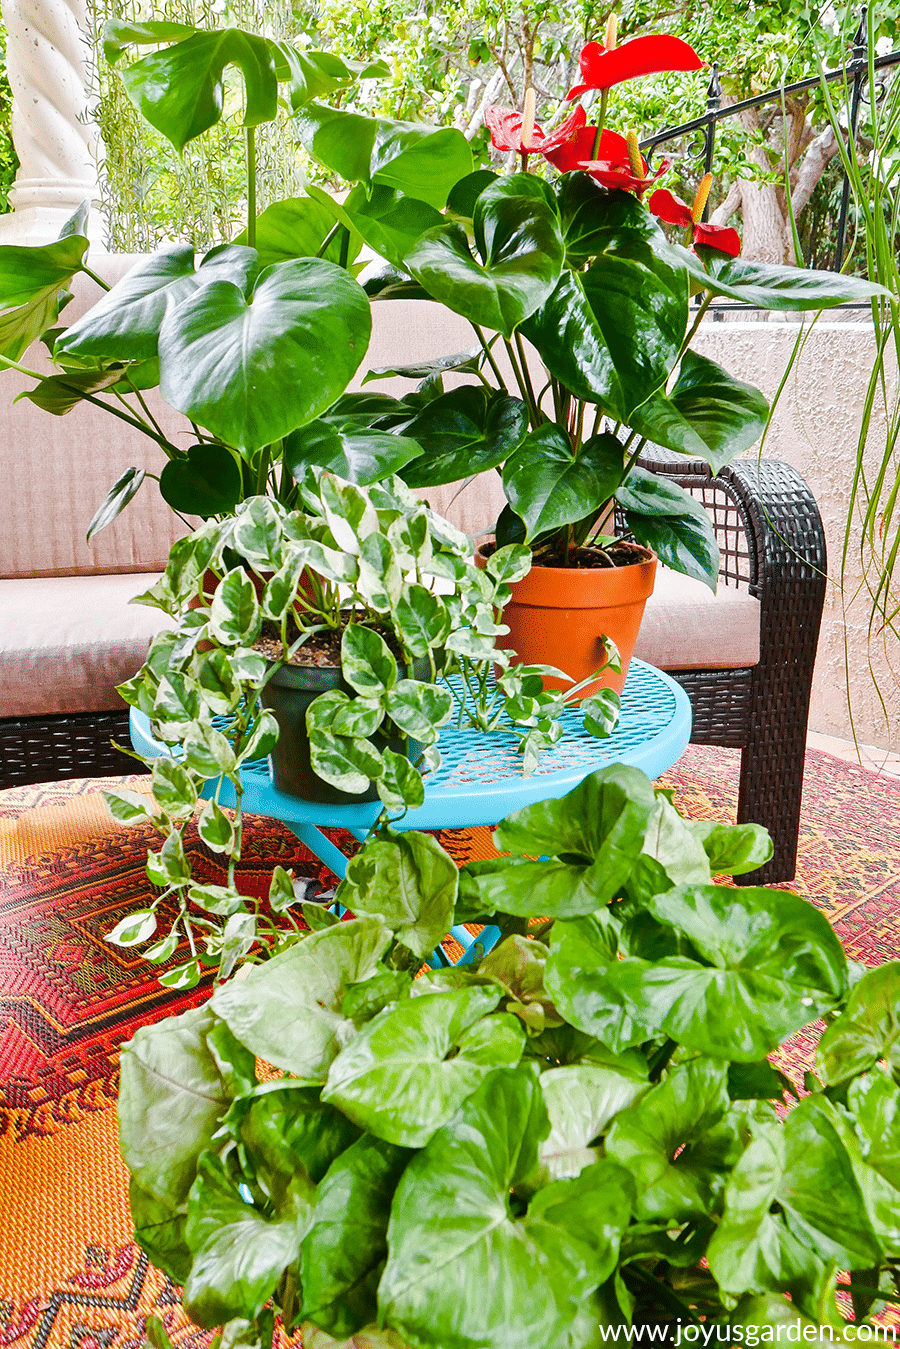 Monstera anthurium & pothos houseplants sit on a teal table with an arrowhead plant on the floor.